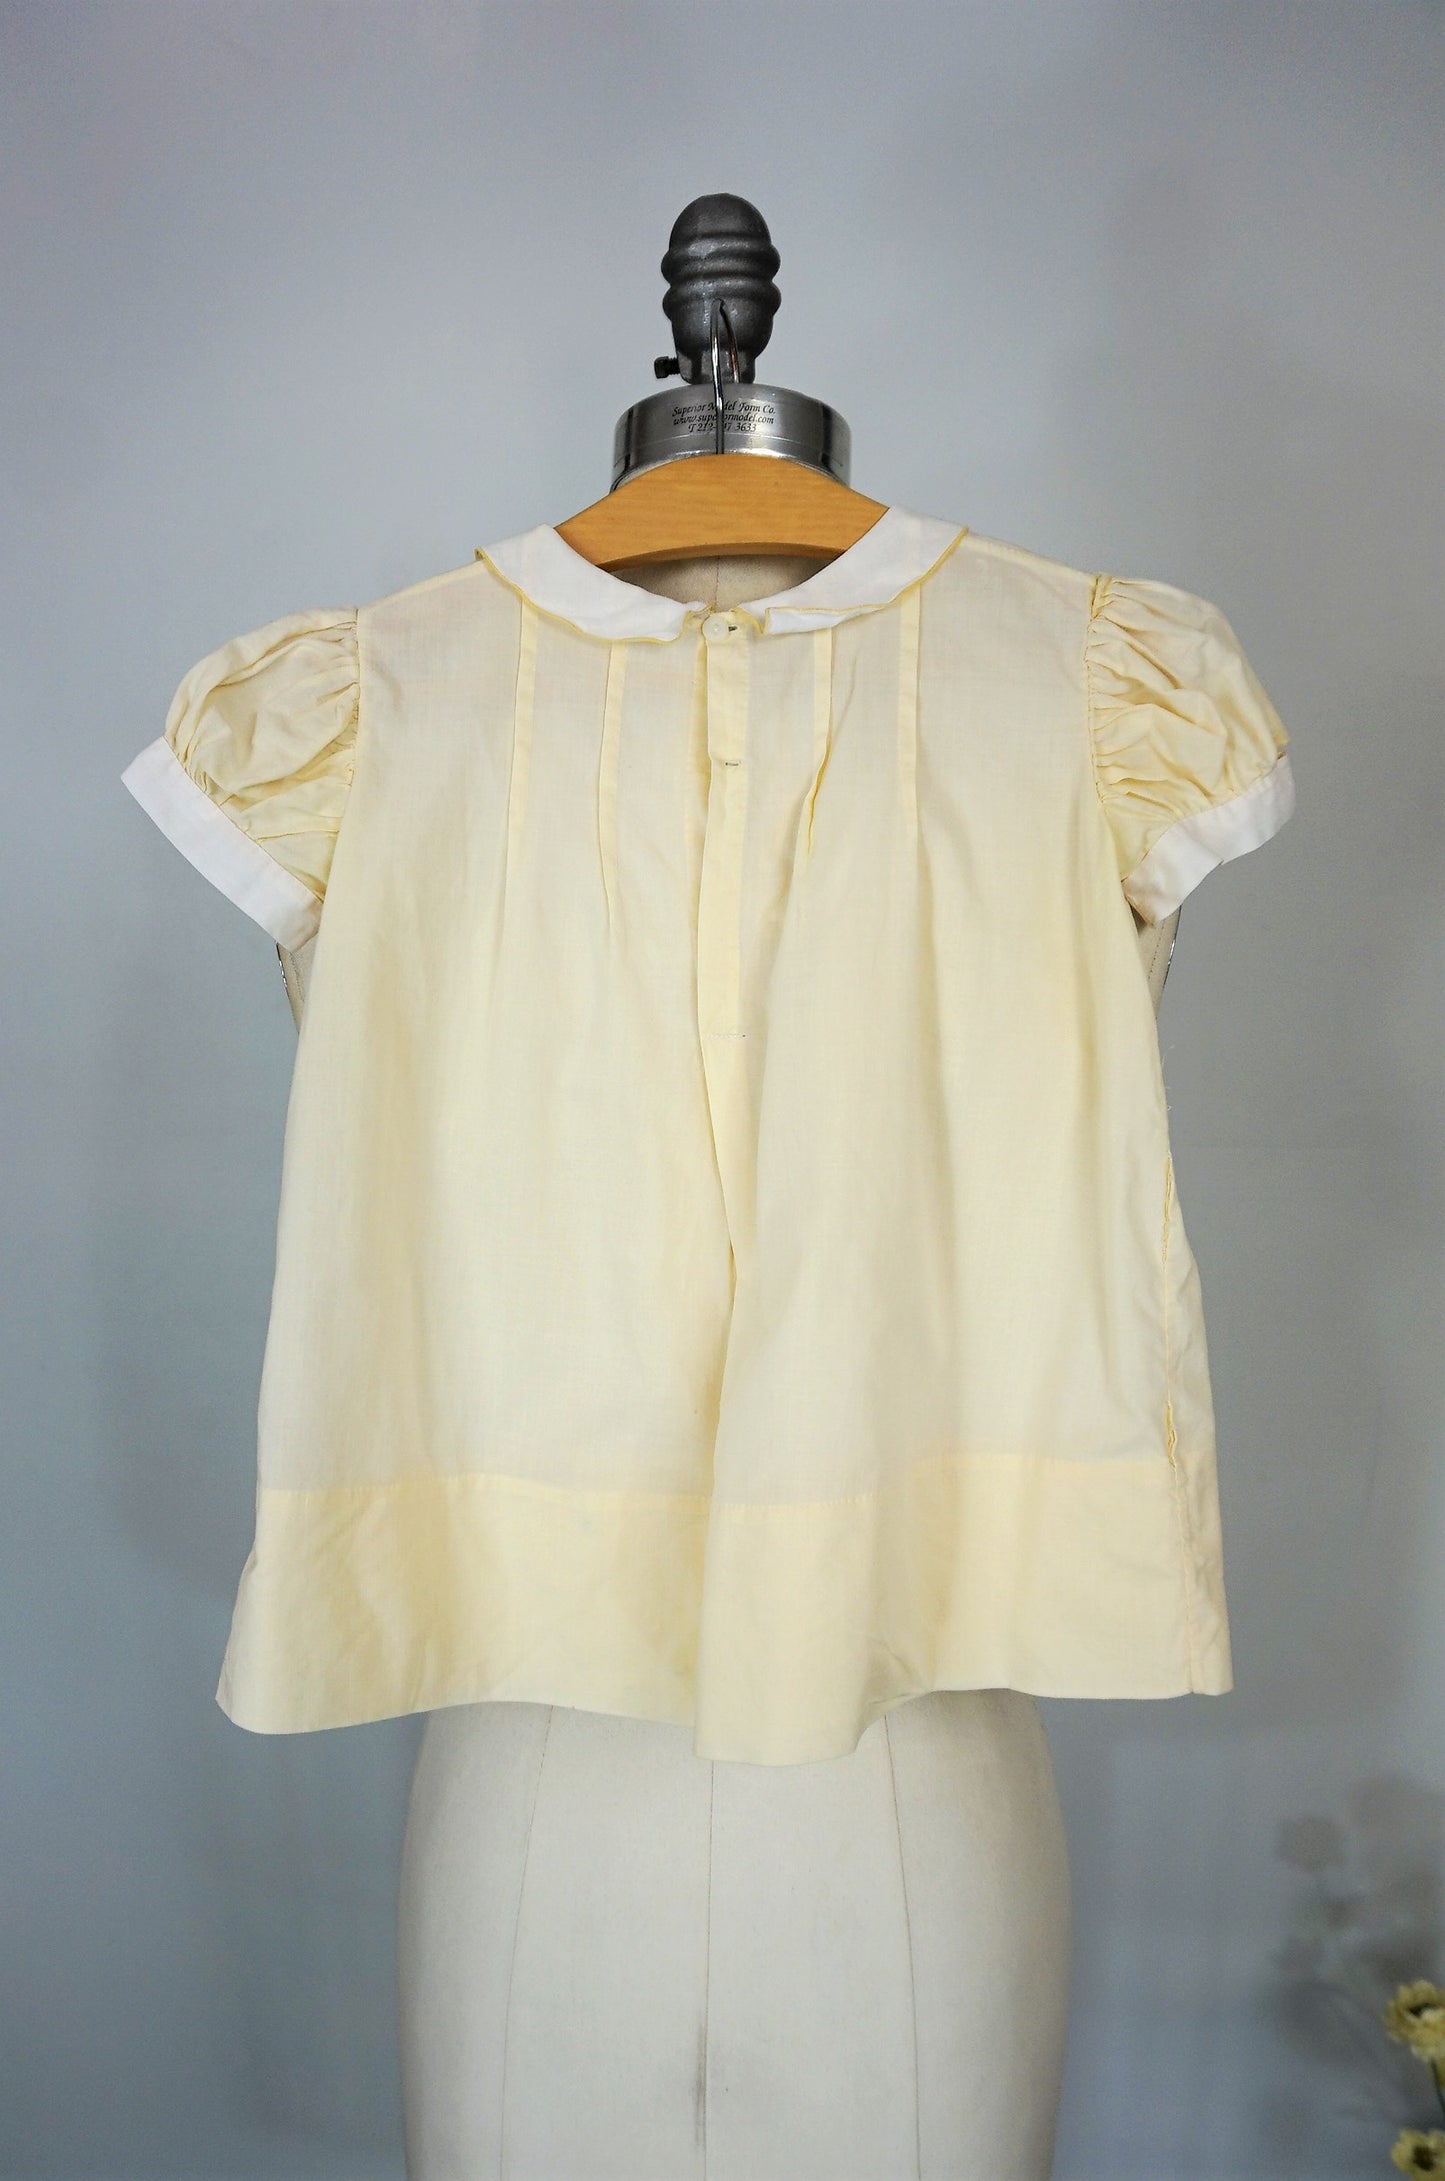 Vintage 1950s Baby Girls Dress With Peter Pan Collar – Toadstool Farm ...